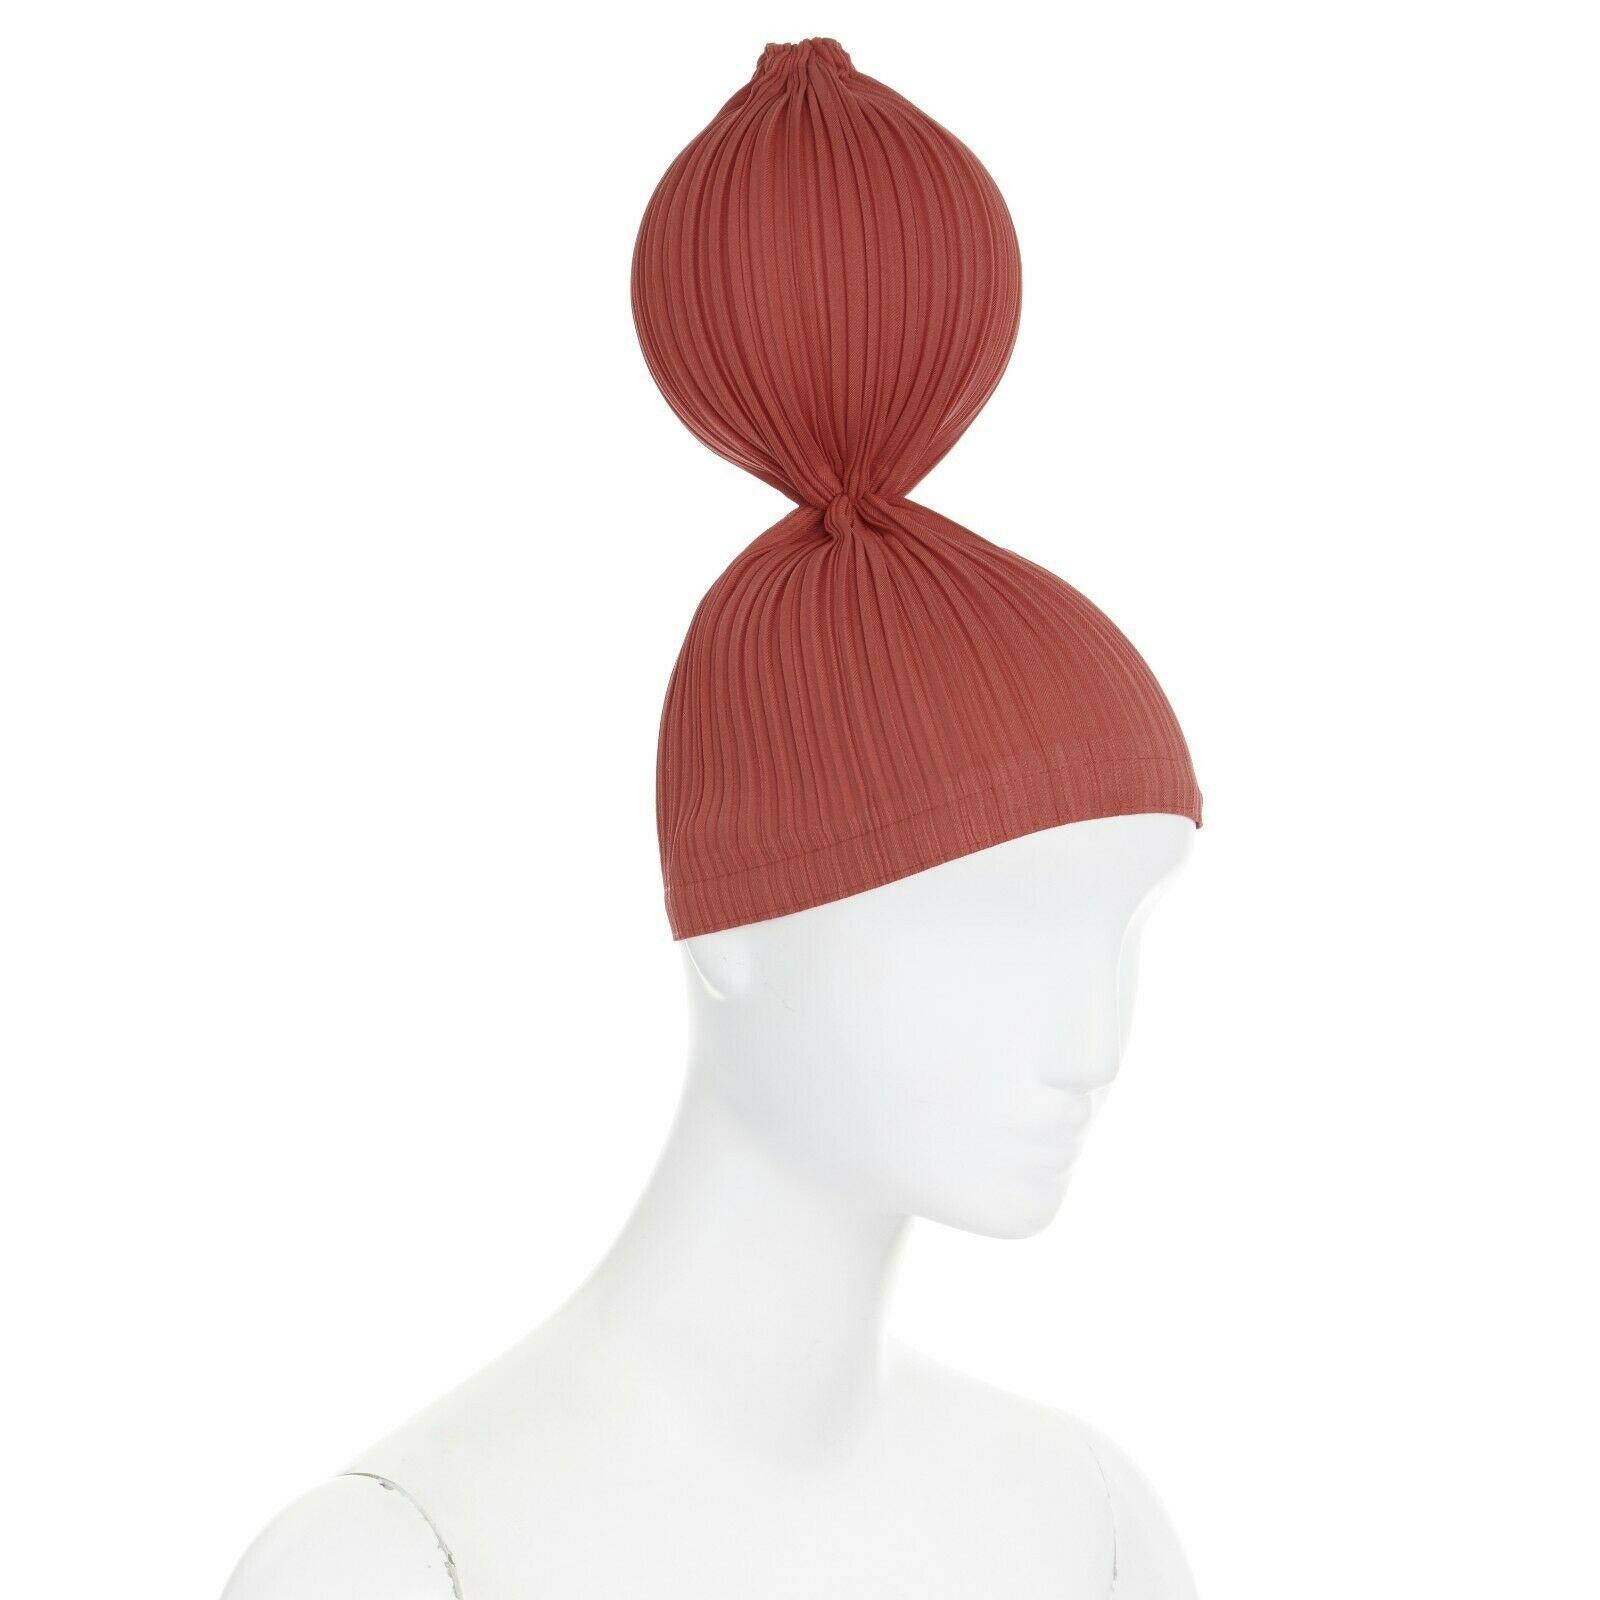 ISSEY MIYAKE PLEATS PLEASE
Signature pleated polyester. Red. Single spherical ball bobble design. Stretch fit. Statement party hat. Grosgrain trimmed along lining. Made in Japan.

CONDITION
New without brand tag. This is a Issey Miyake Pleats Please